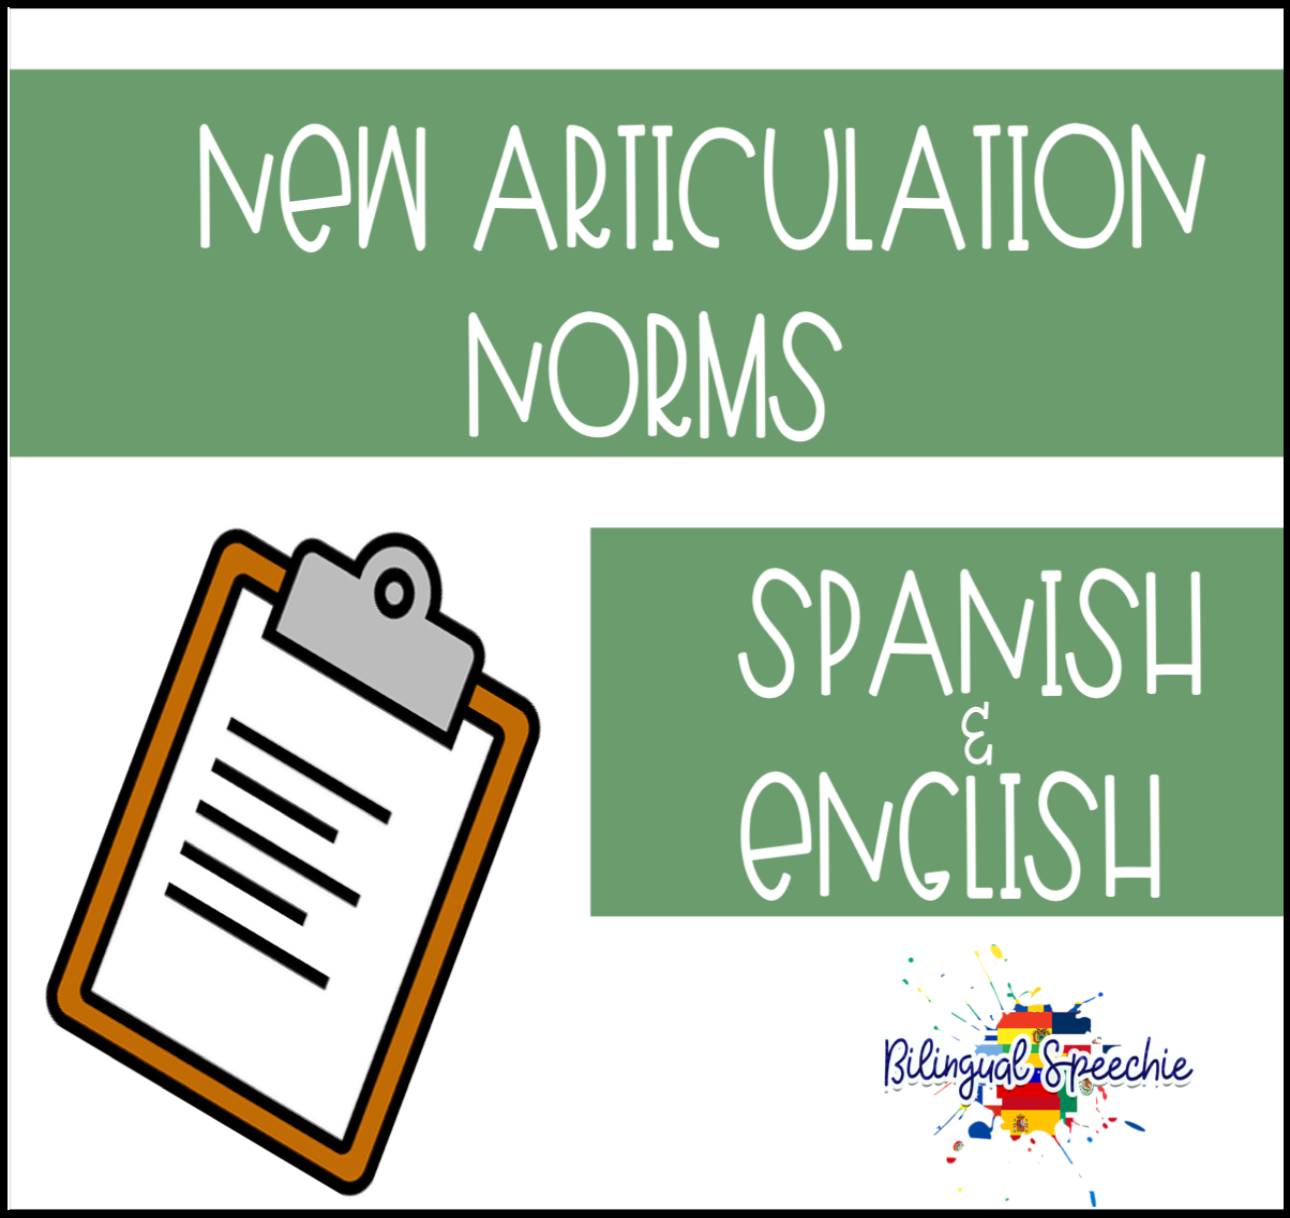 Spanish & English Articulation Norms